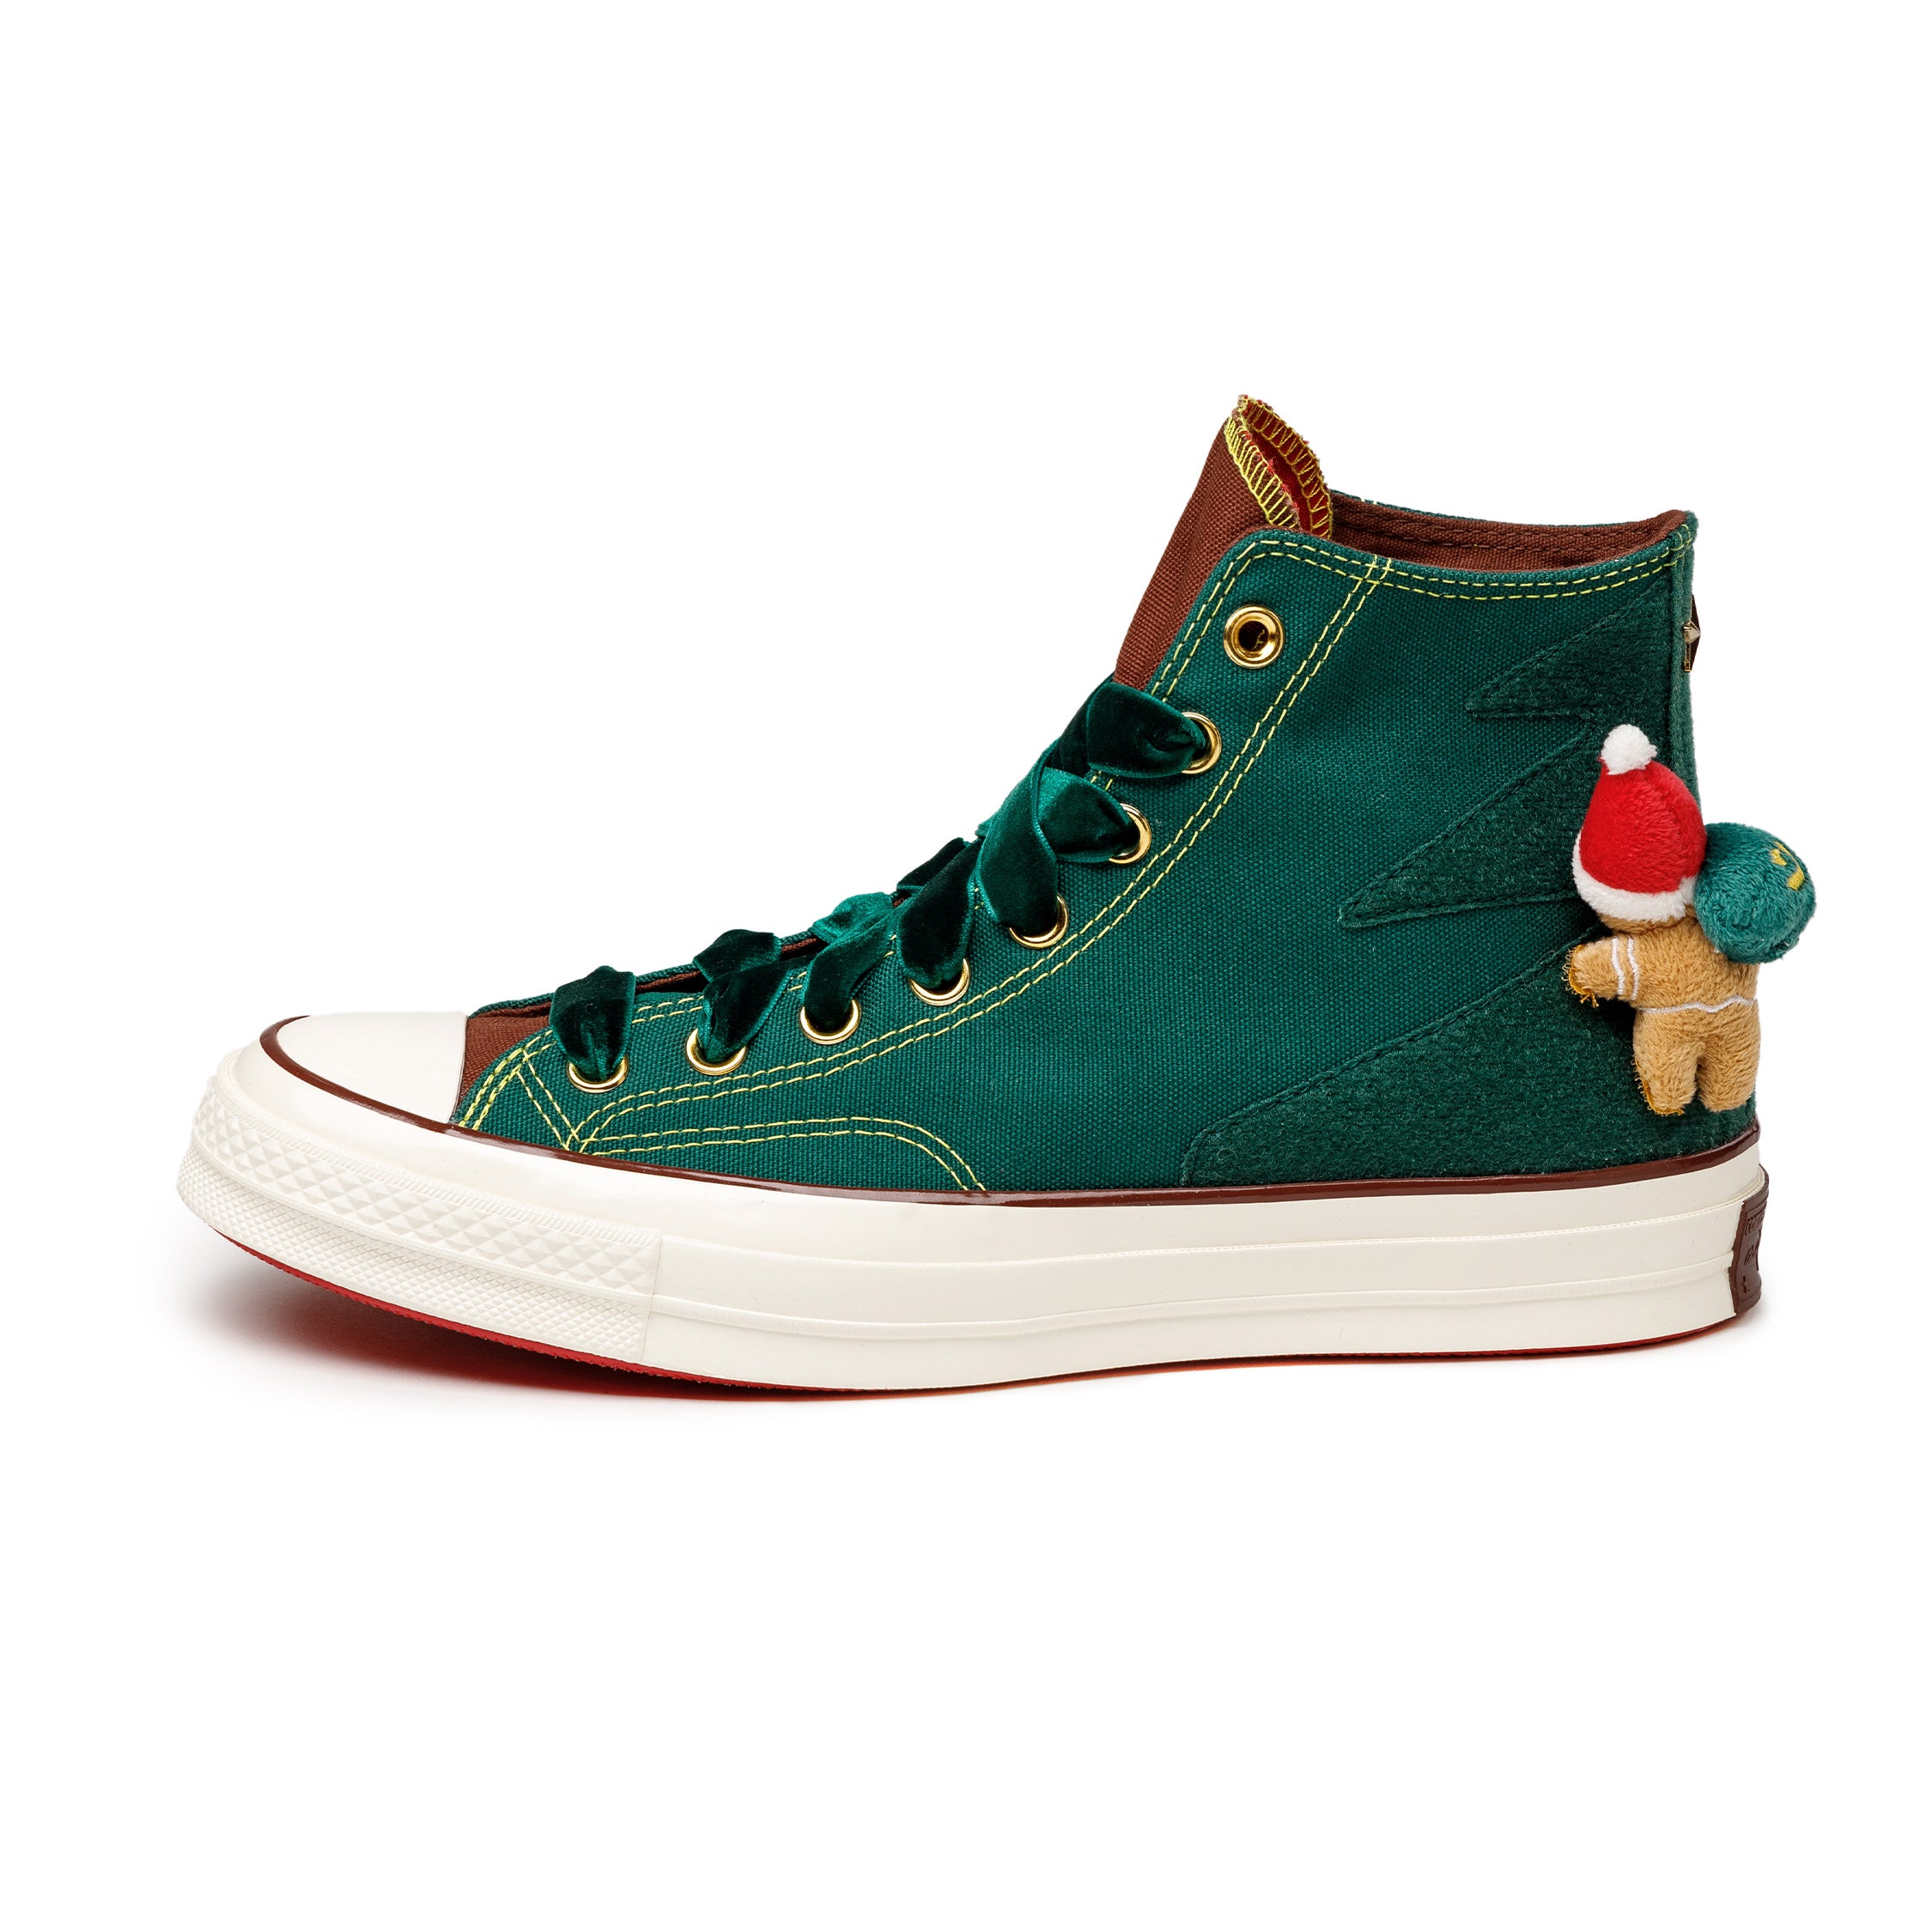 Converse Chuck Taylor All Star '70 Hi » Buy online now!